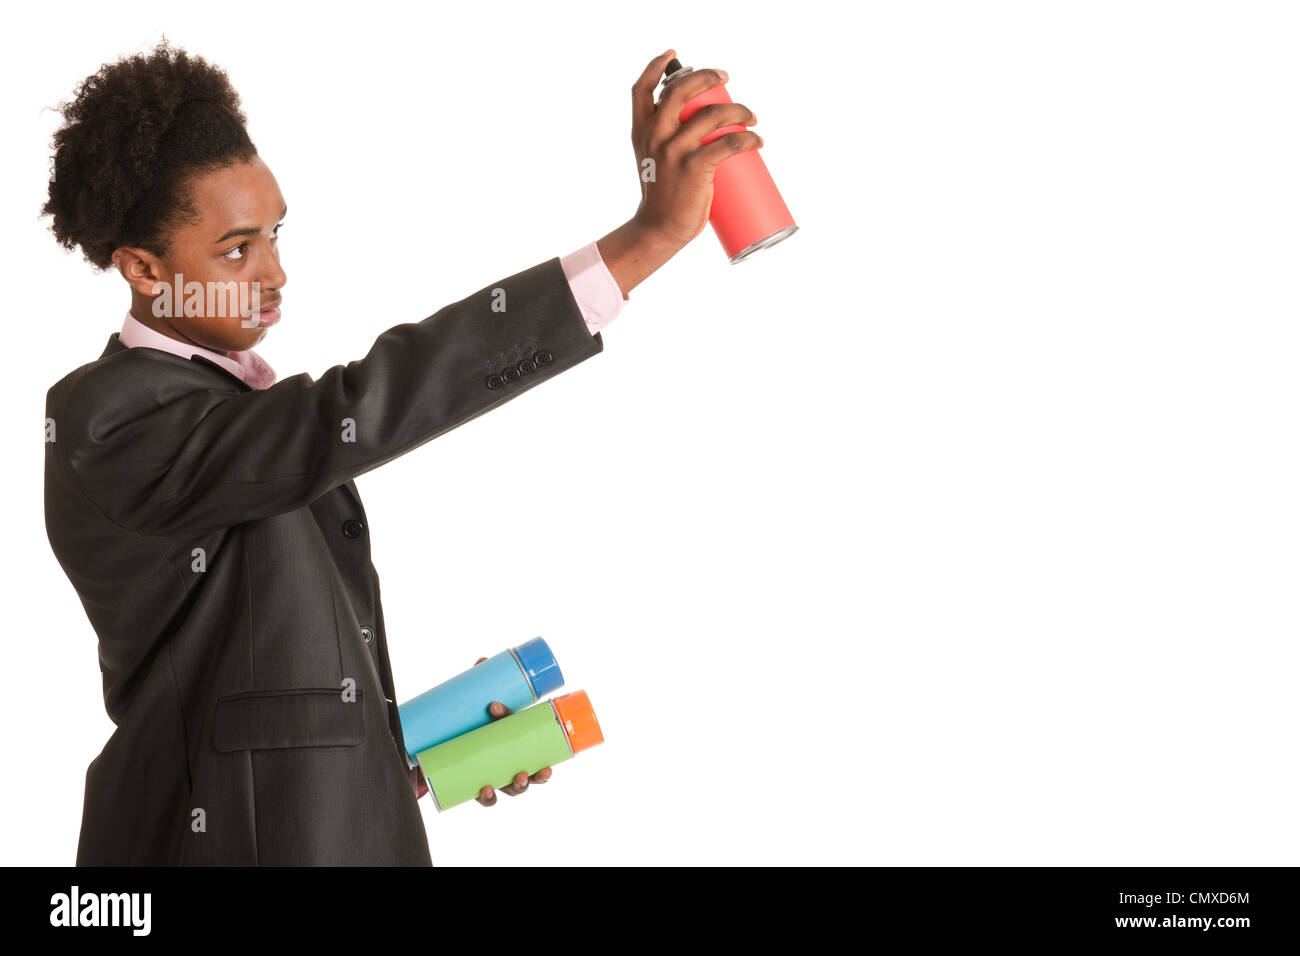 Studio portrait of a young African American man with graffiti aerosols Stock Photo